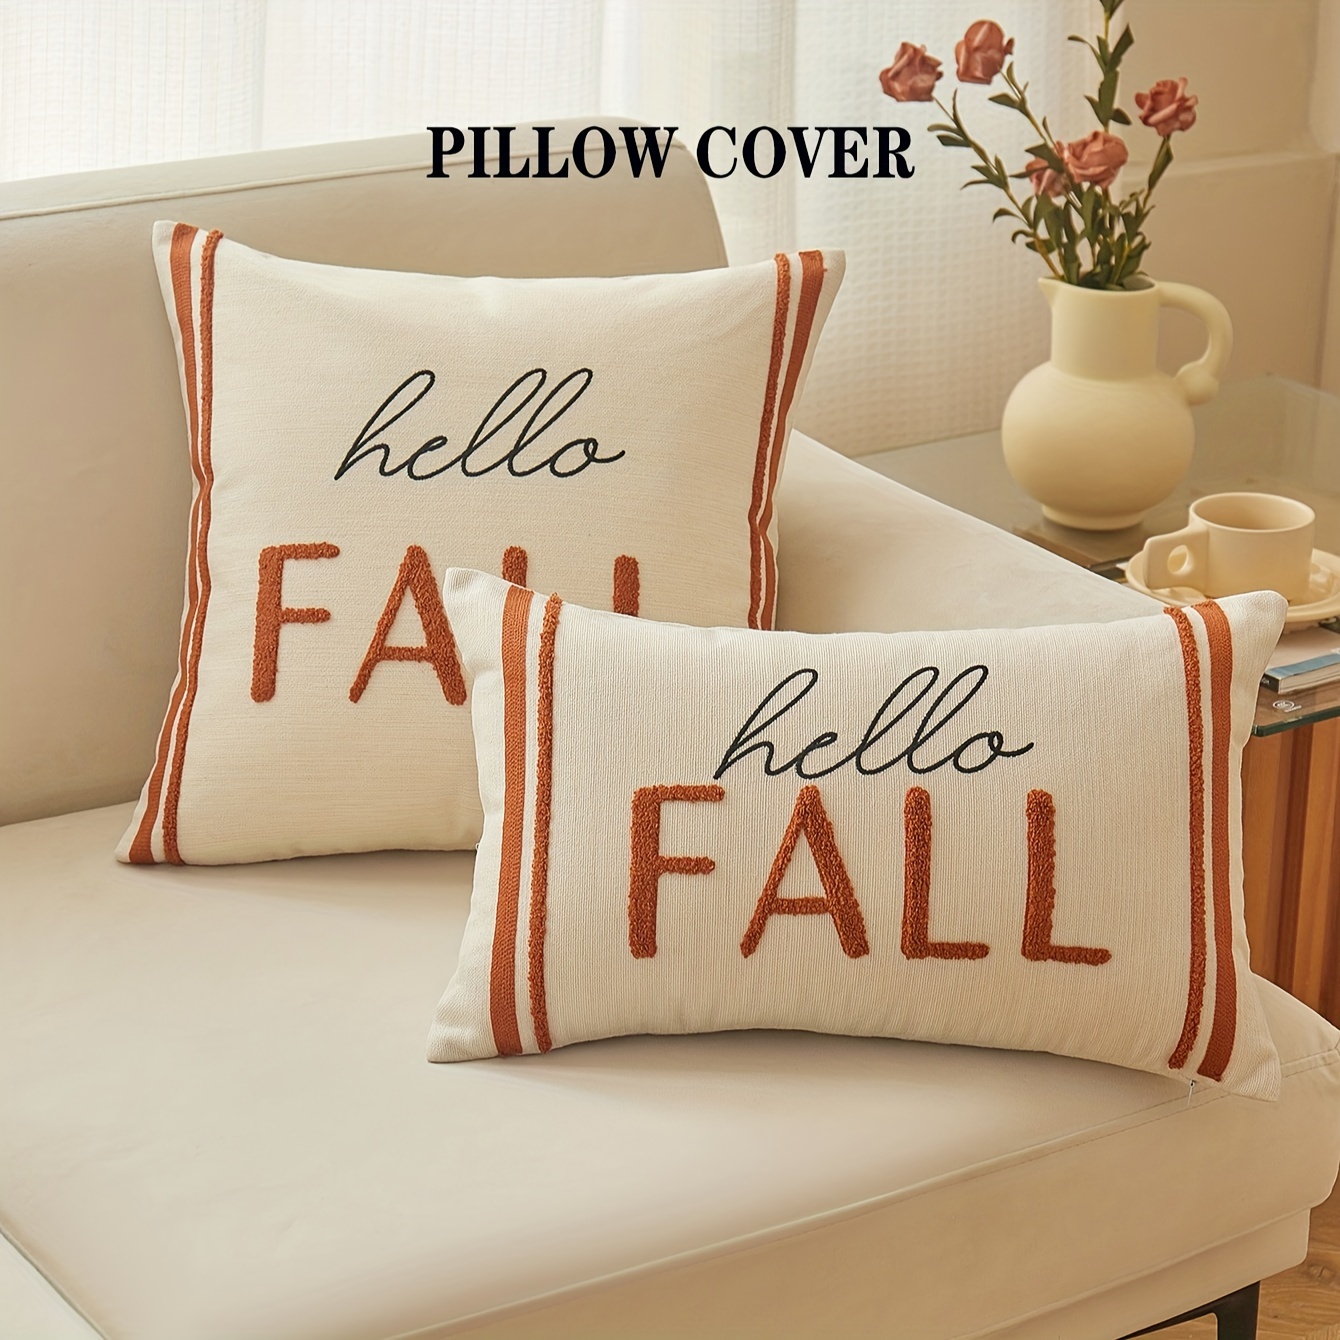 

Vintage Style Embroidered Hello Fall Lettering Striped Throw Pillow Covers - Polyester Woven Cushion Covers With Zipper For Home Decor, Spot-clean, Fits Various Room Types - Set Of 1